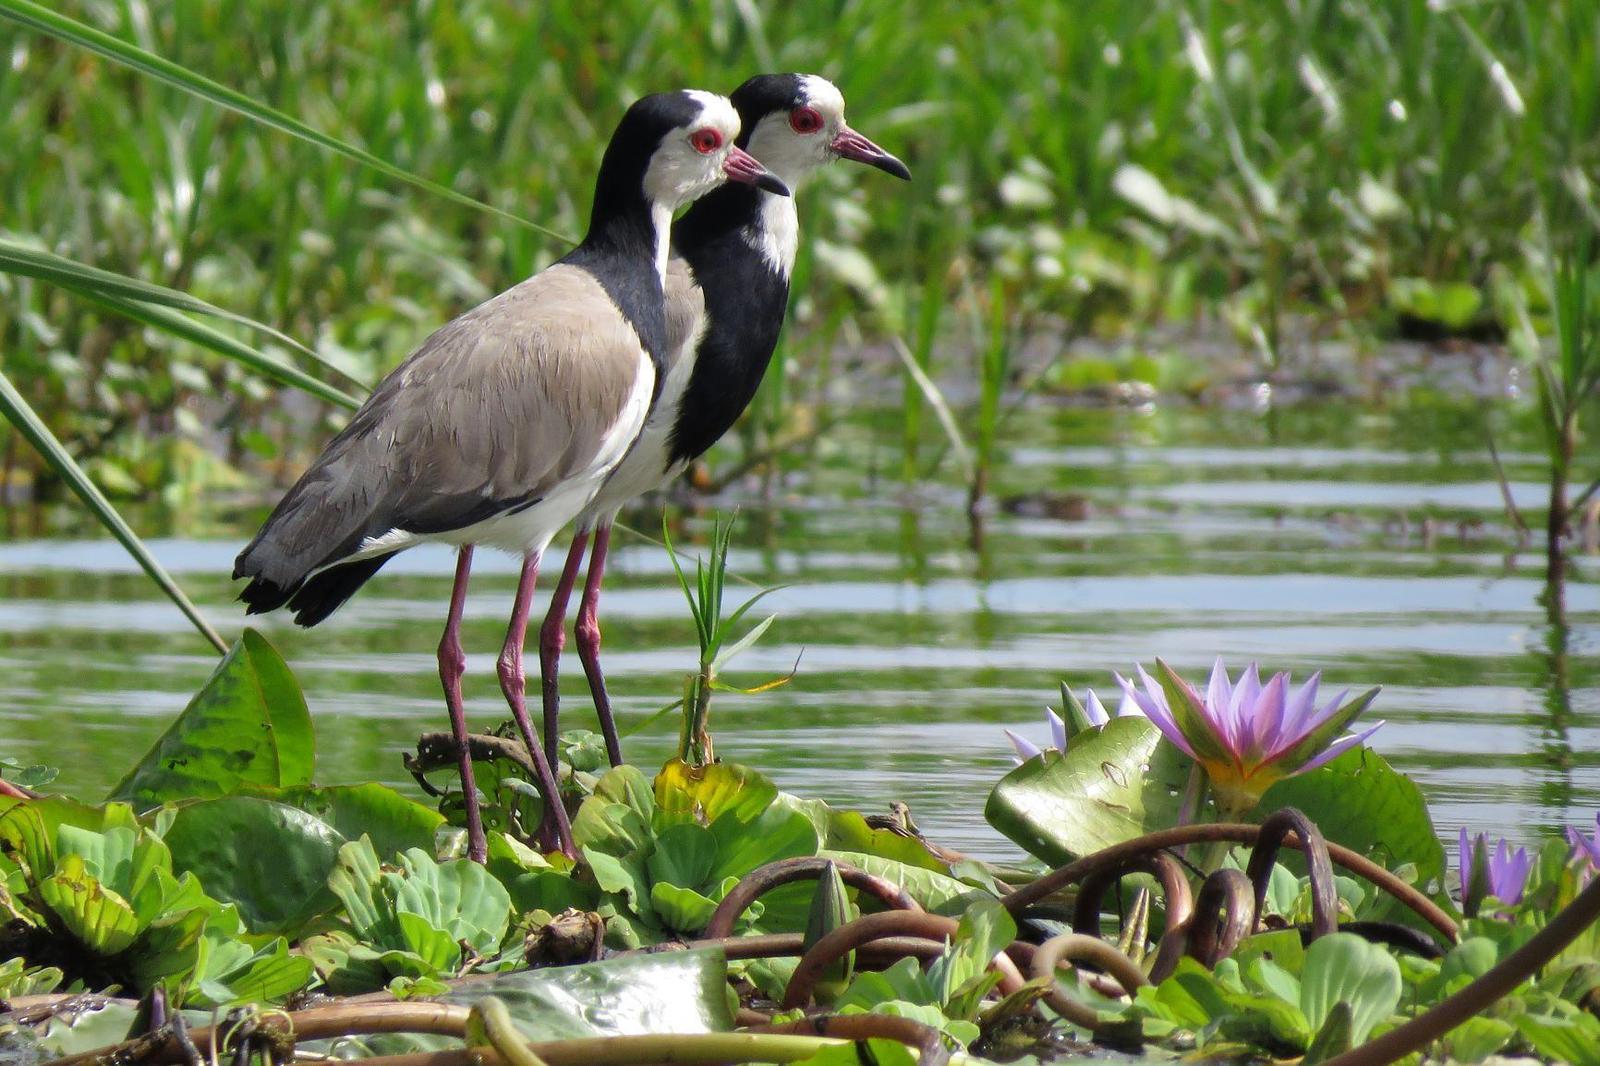 Long-toed Lapwing Photo by Cyndee Pelt